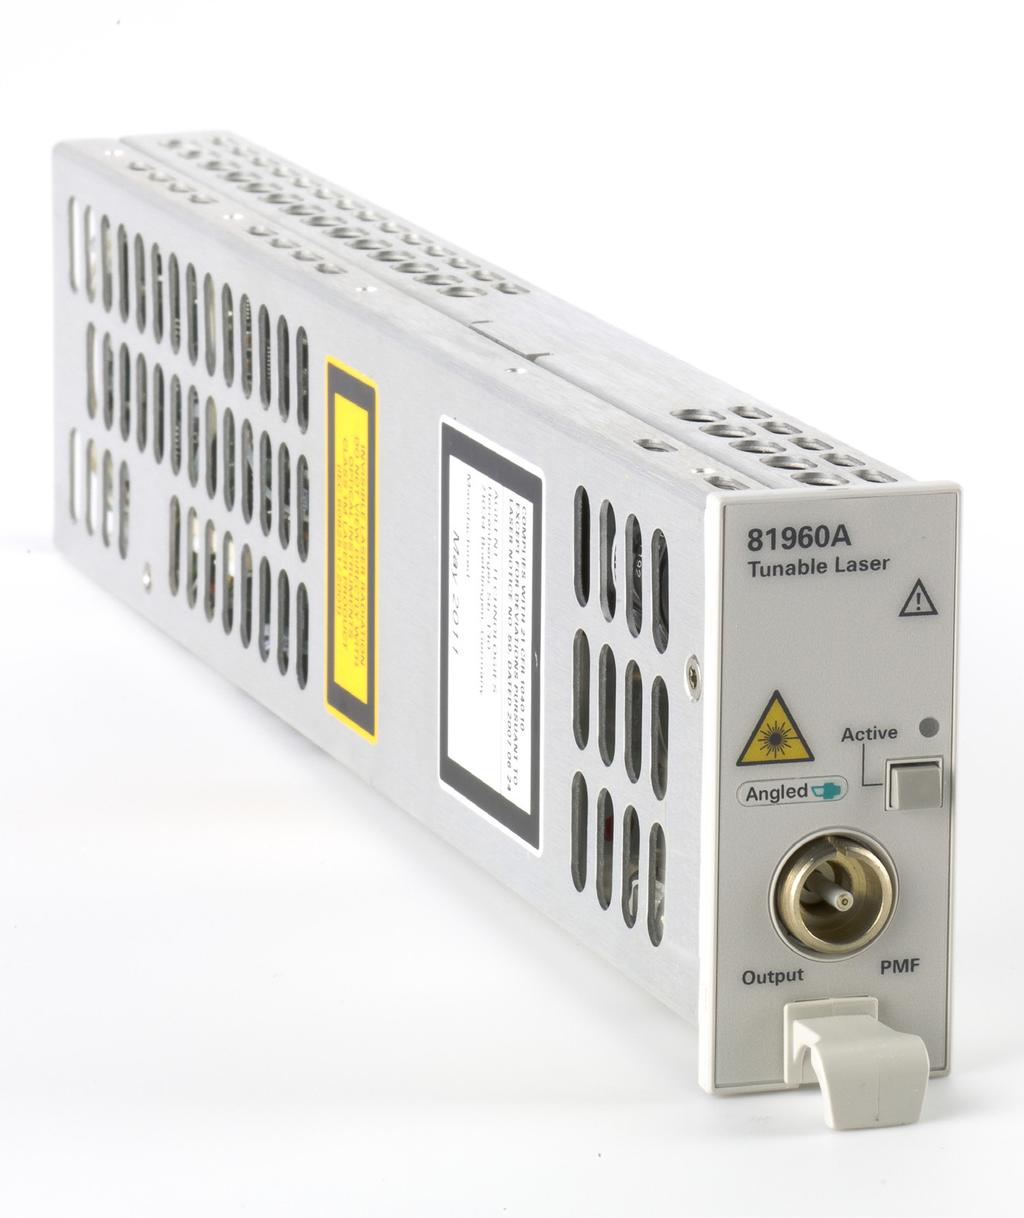 Agilent 81980A, 81960A, 81940A, 81989A, 81949A, and 81950A Compact Tunable Laser Sources Data Sheet Introduction The Agilent 819xxA Series of compact tunable lasers enables optical device